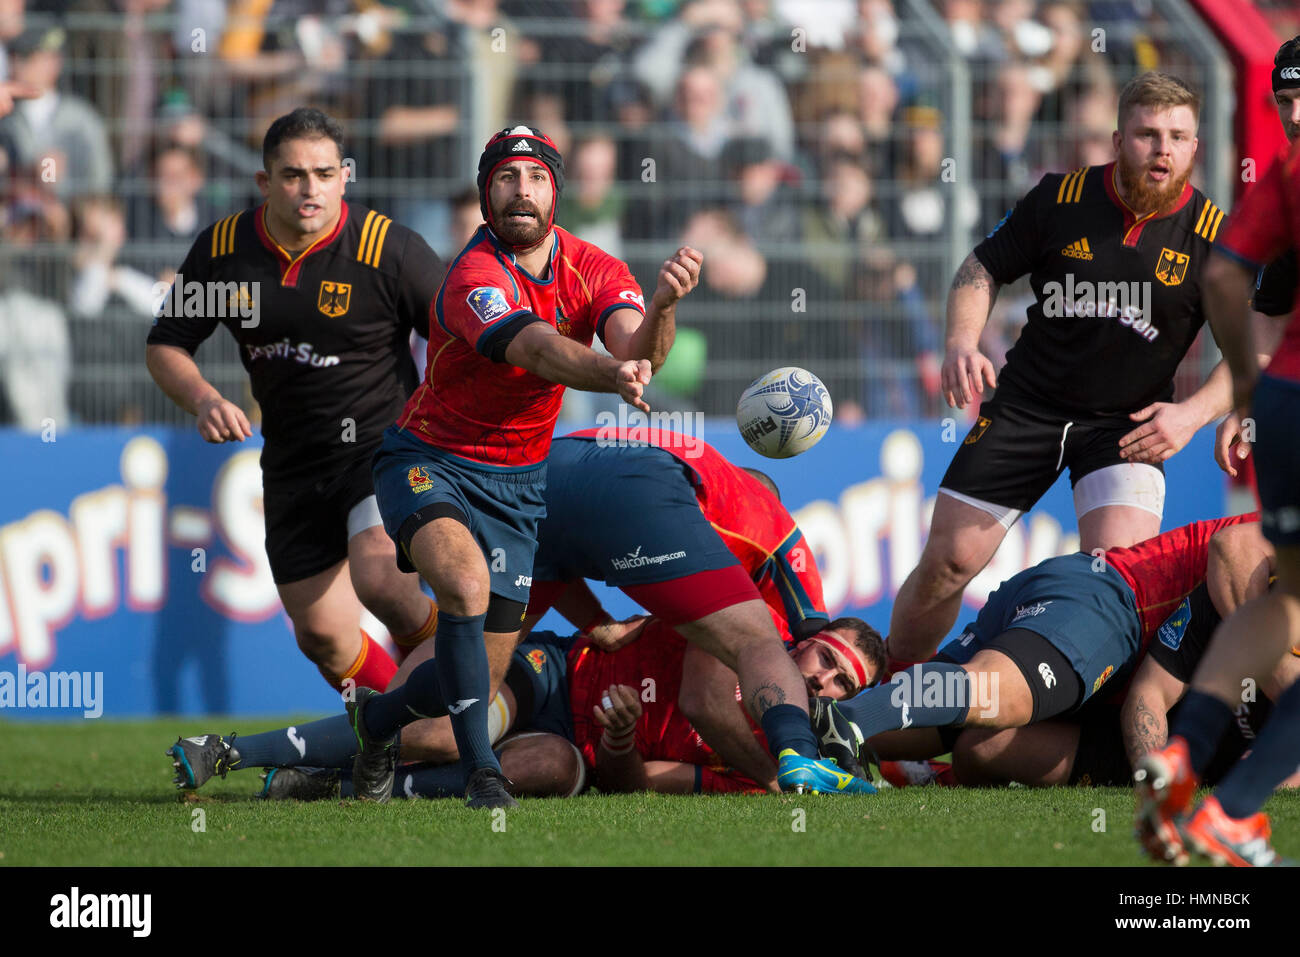 Cologne, Germany. 11th Mar, 2017. Spain's Mathieu Belie in action during the European Rugby Championship Division 1A match between Germany and Spain in Cologne, Germany, 11 March 2017. Photo: Jürgen Keßler/dpa/Alamy Live News Stock Photo